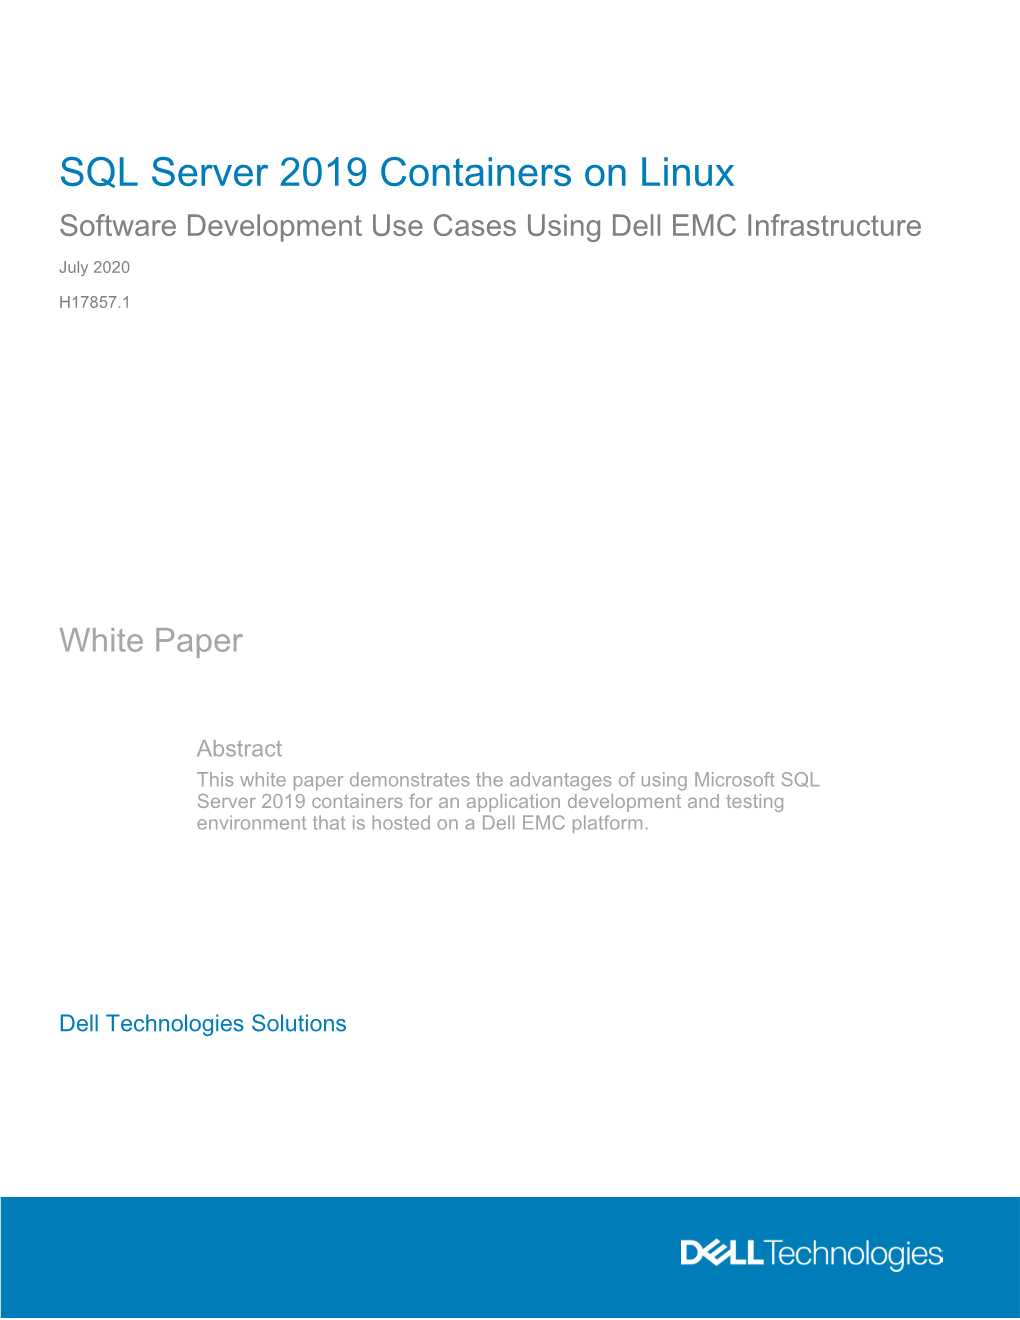 SQL Server 2019 Containers on Linux Software Development Use Cases Using Dell EMC Infrastructure July 2020